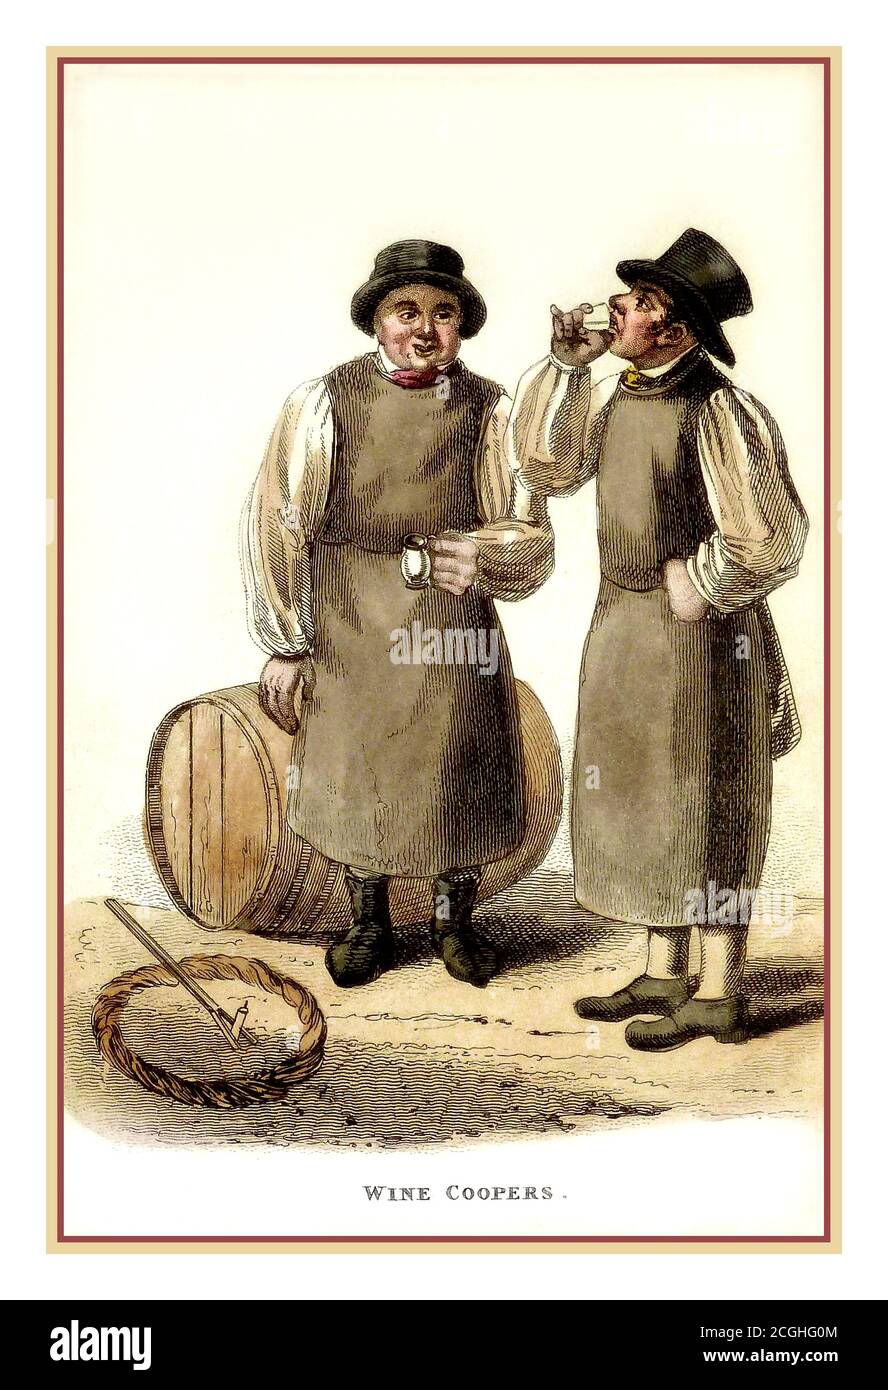 Vintage Wine Coopers sampling drinking alcohol wine from barrel Illustration Lithograph,1827 Wine coopers vintners wearing traditional shirt, leather apron and hat. Colour copperplate engraving from William Henry Pyne's The World in Miniature: England, Scotland and Ireland, Ackermann, 1827 Stock Photo